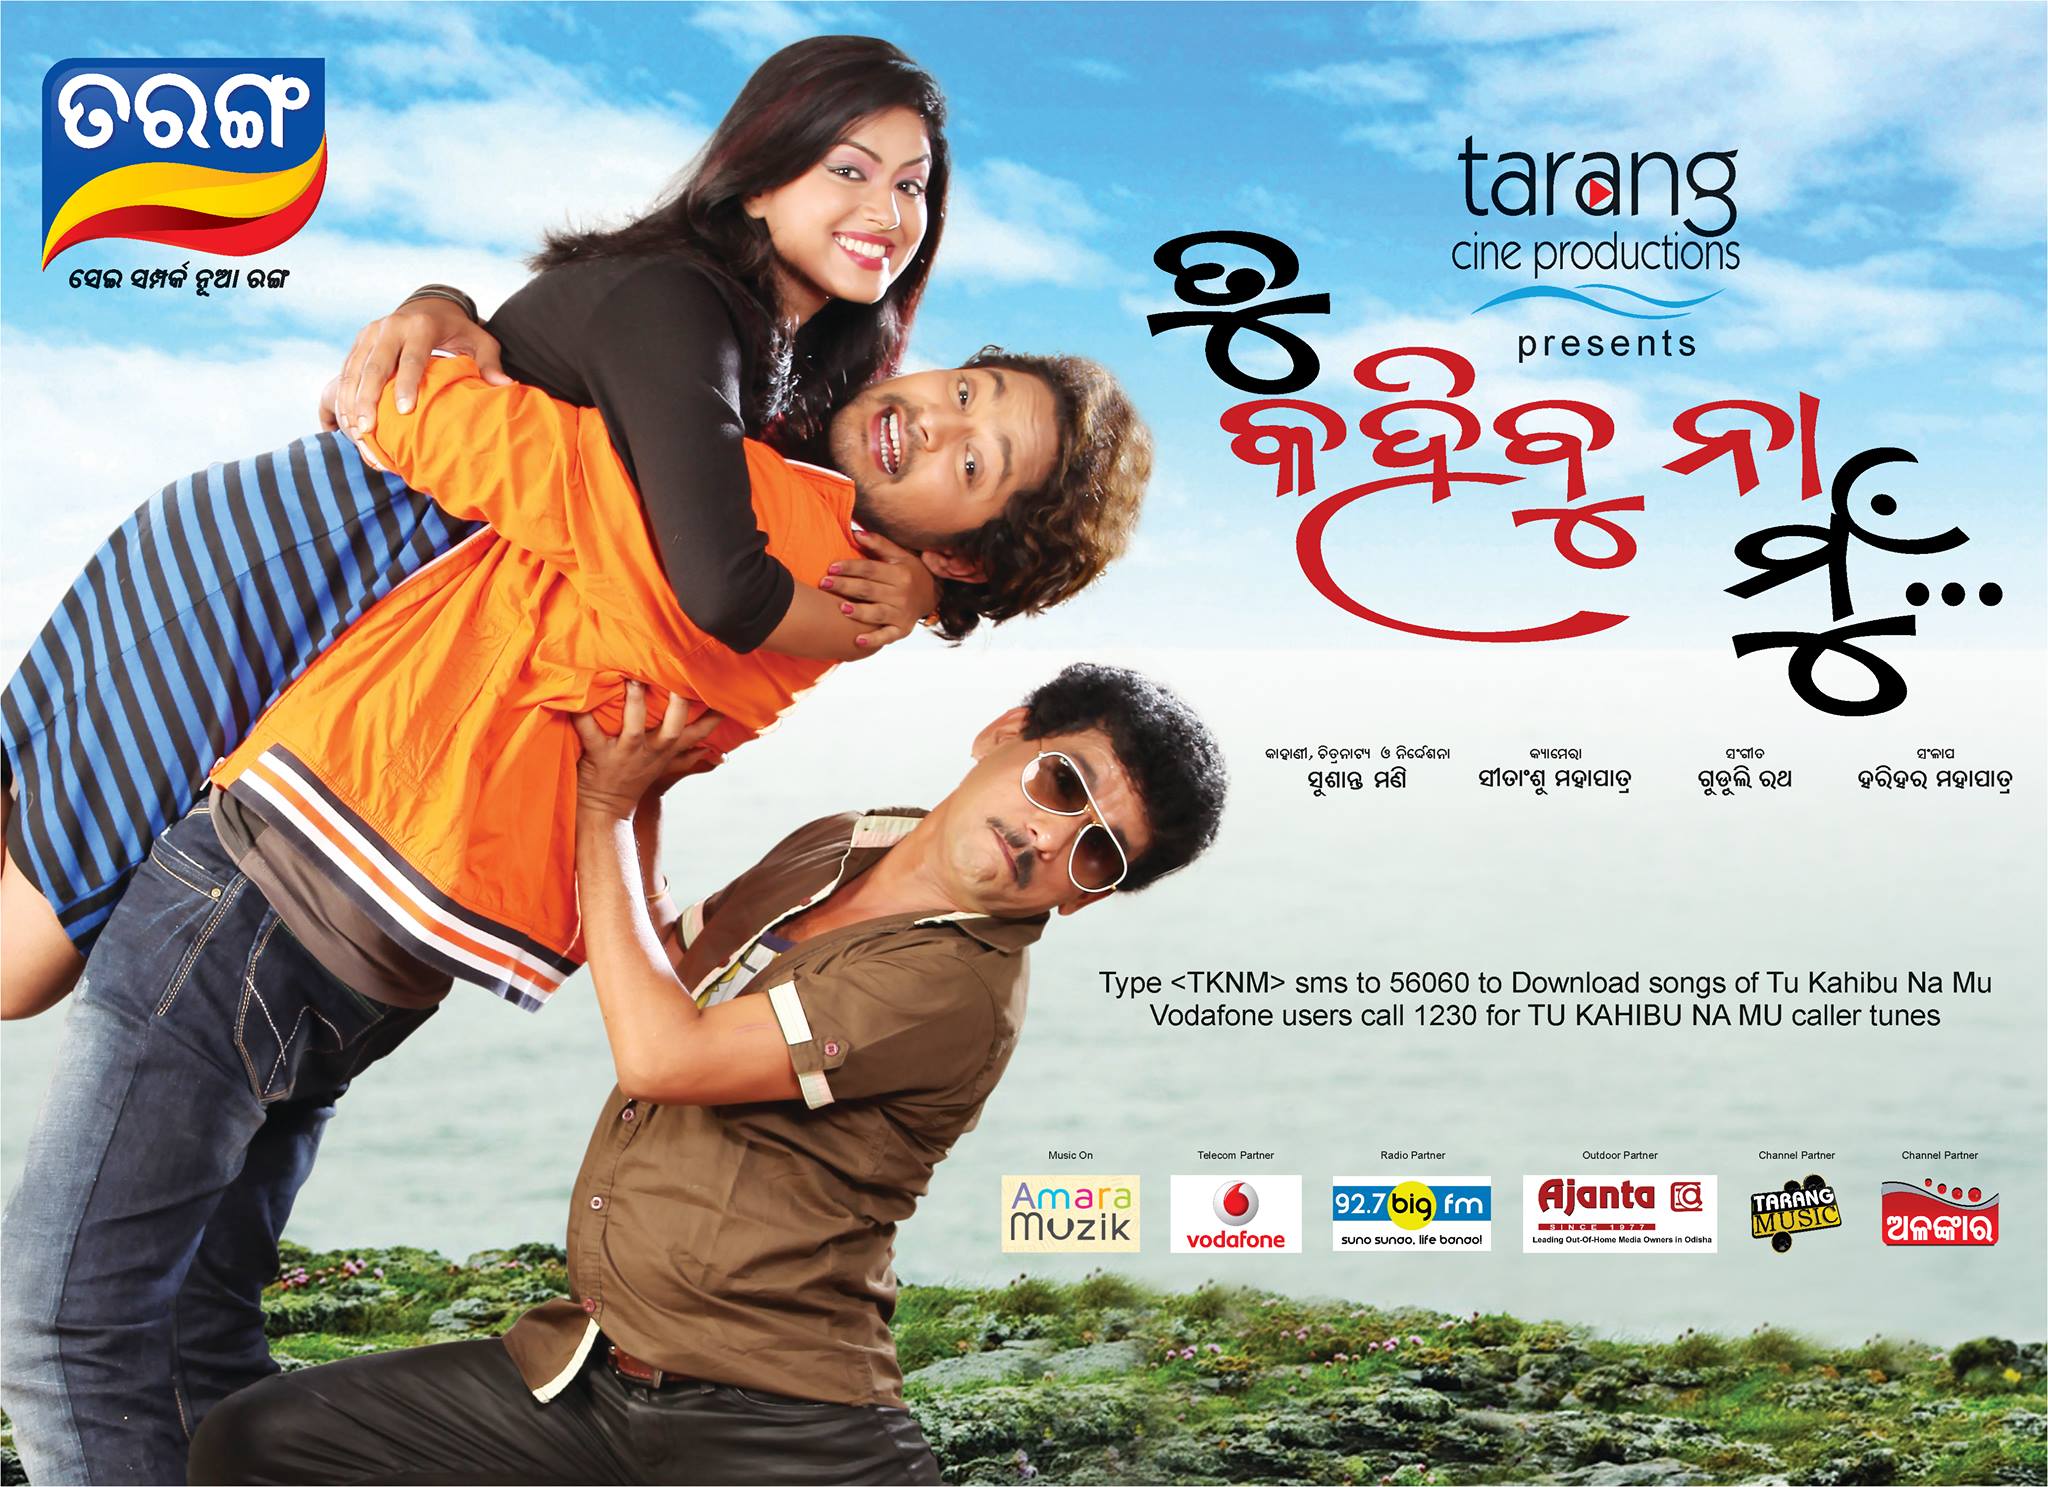 Top 10 Odia film Posters 18